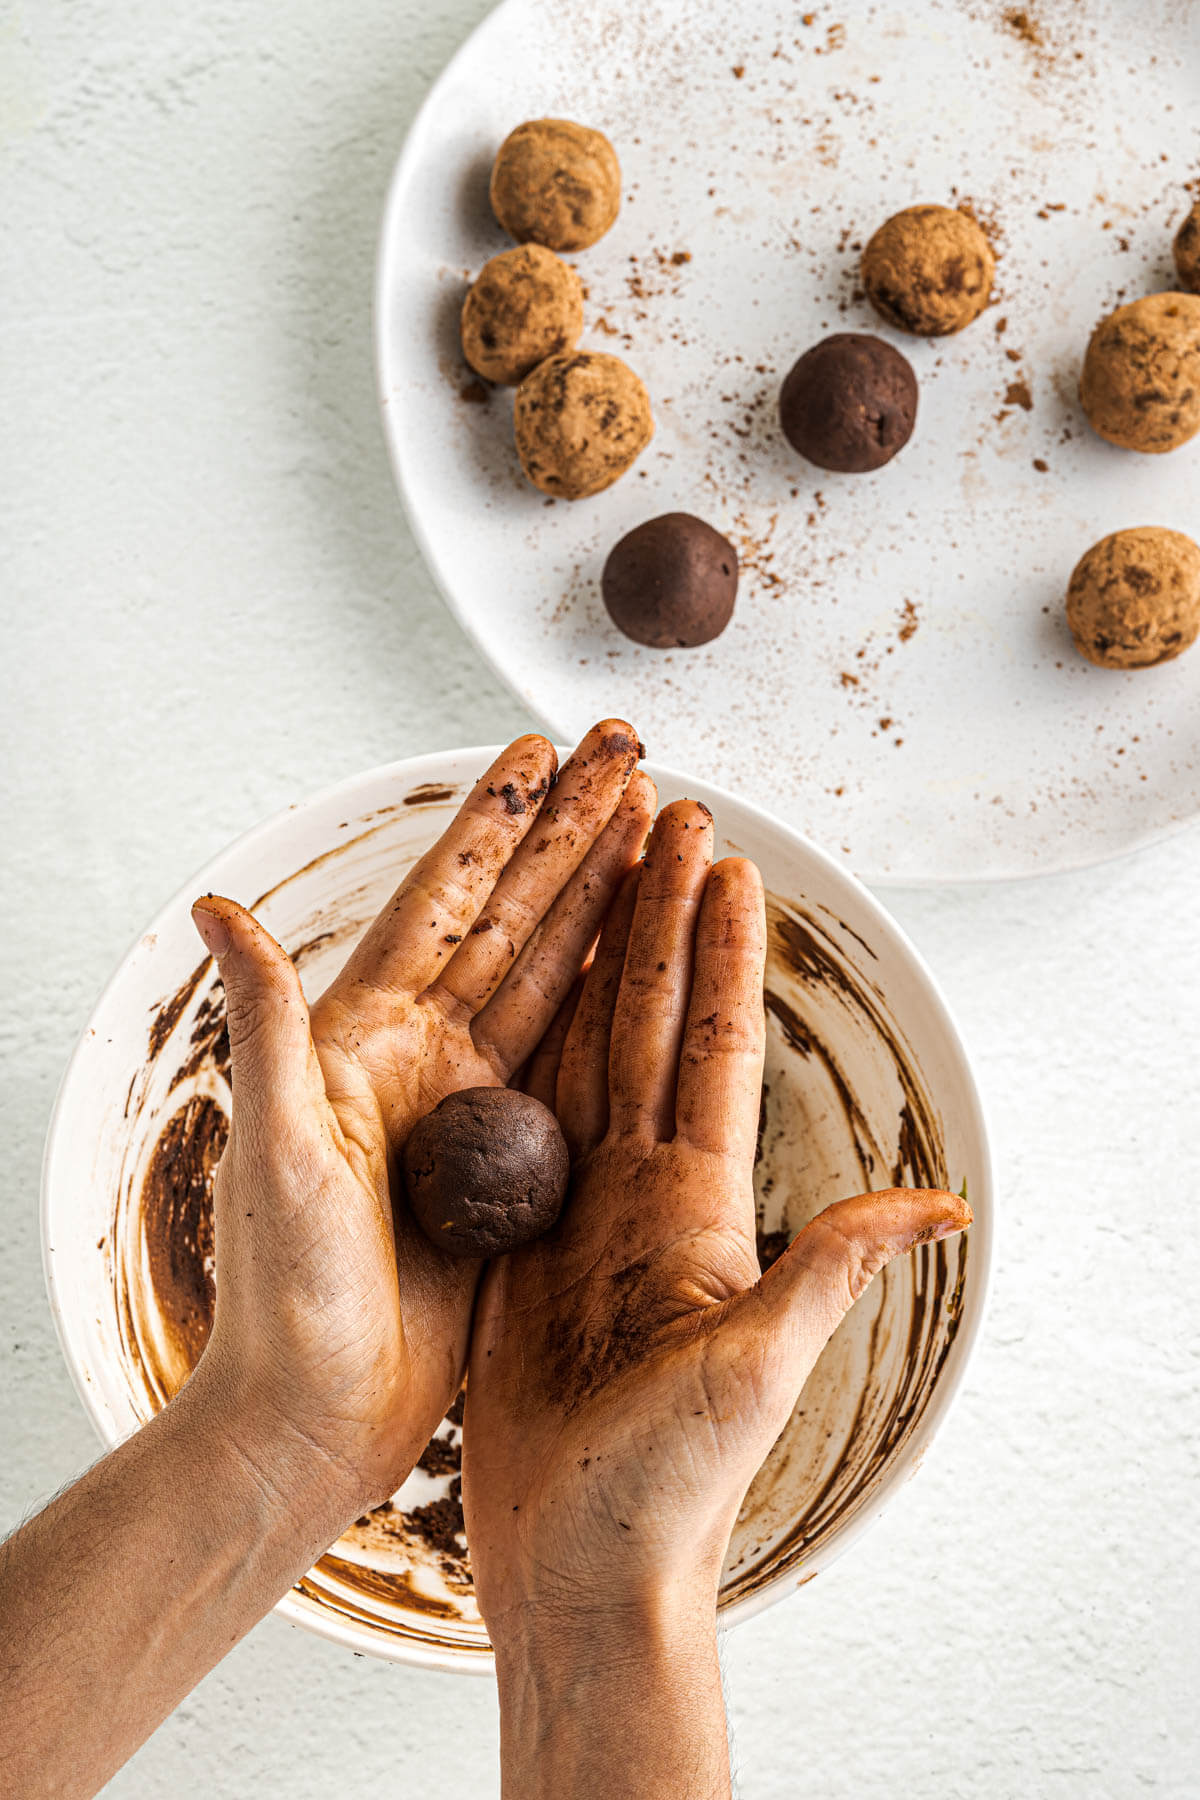 Process shot of a pair of hands rolling a chocolate truffle.